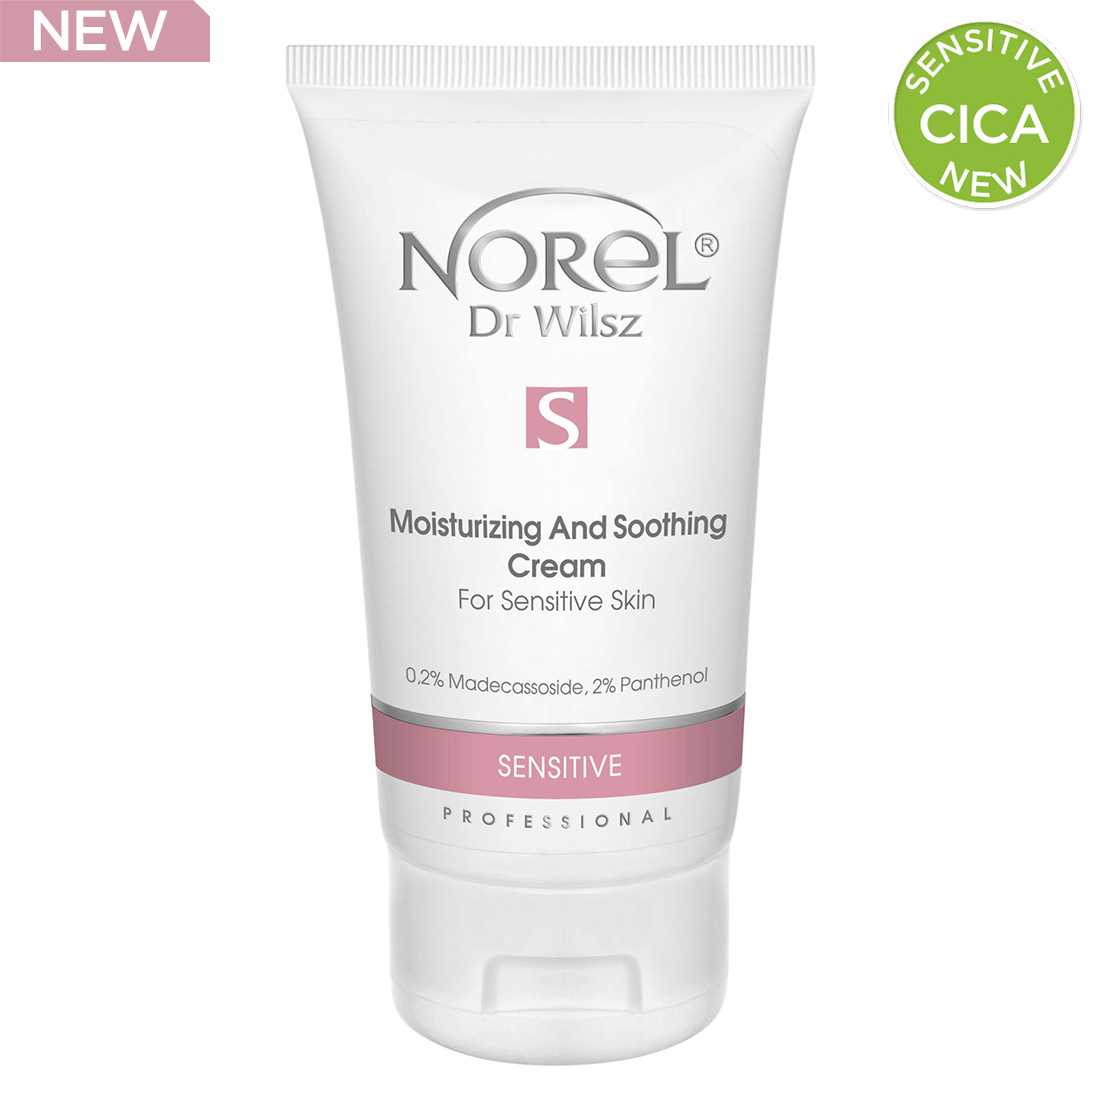 Moisturizing And Soothing Cream For Sensitive Skin